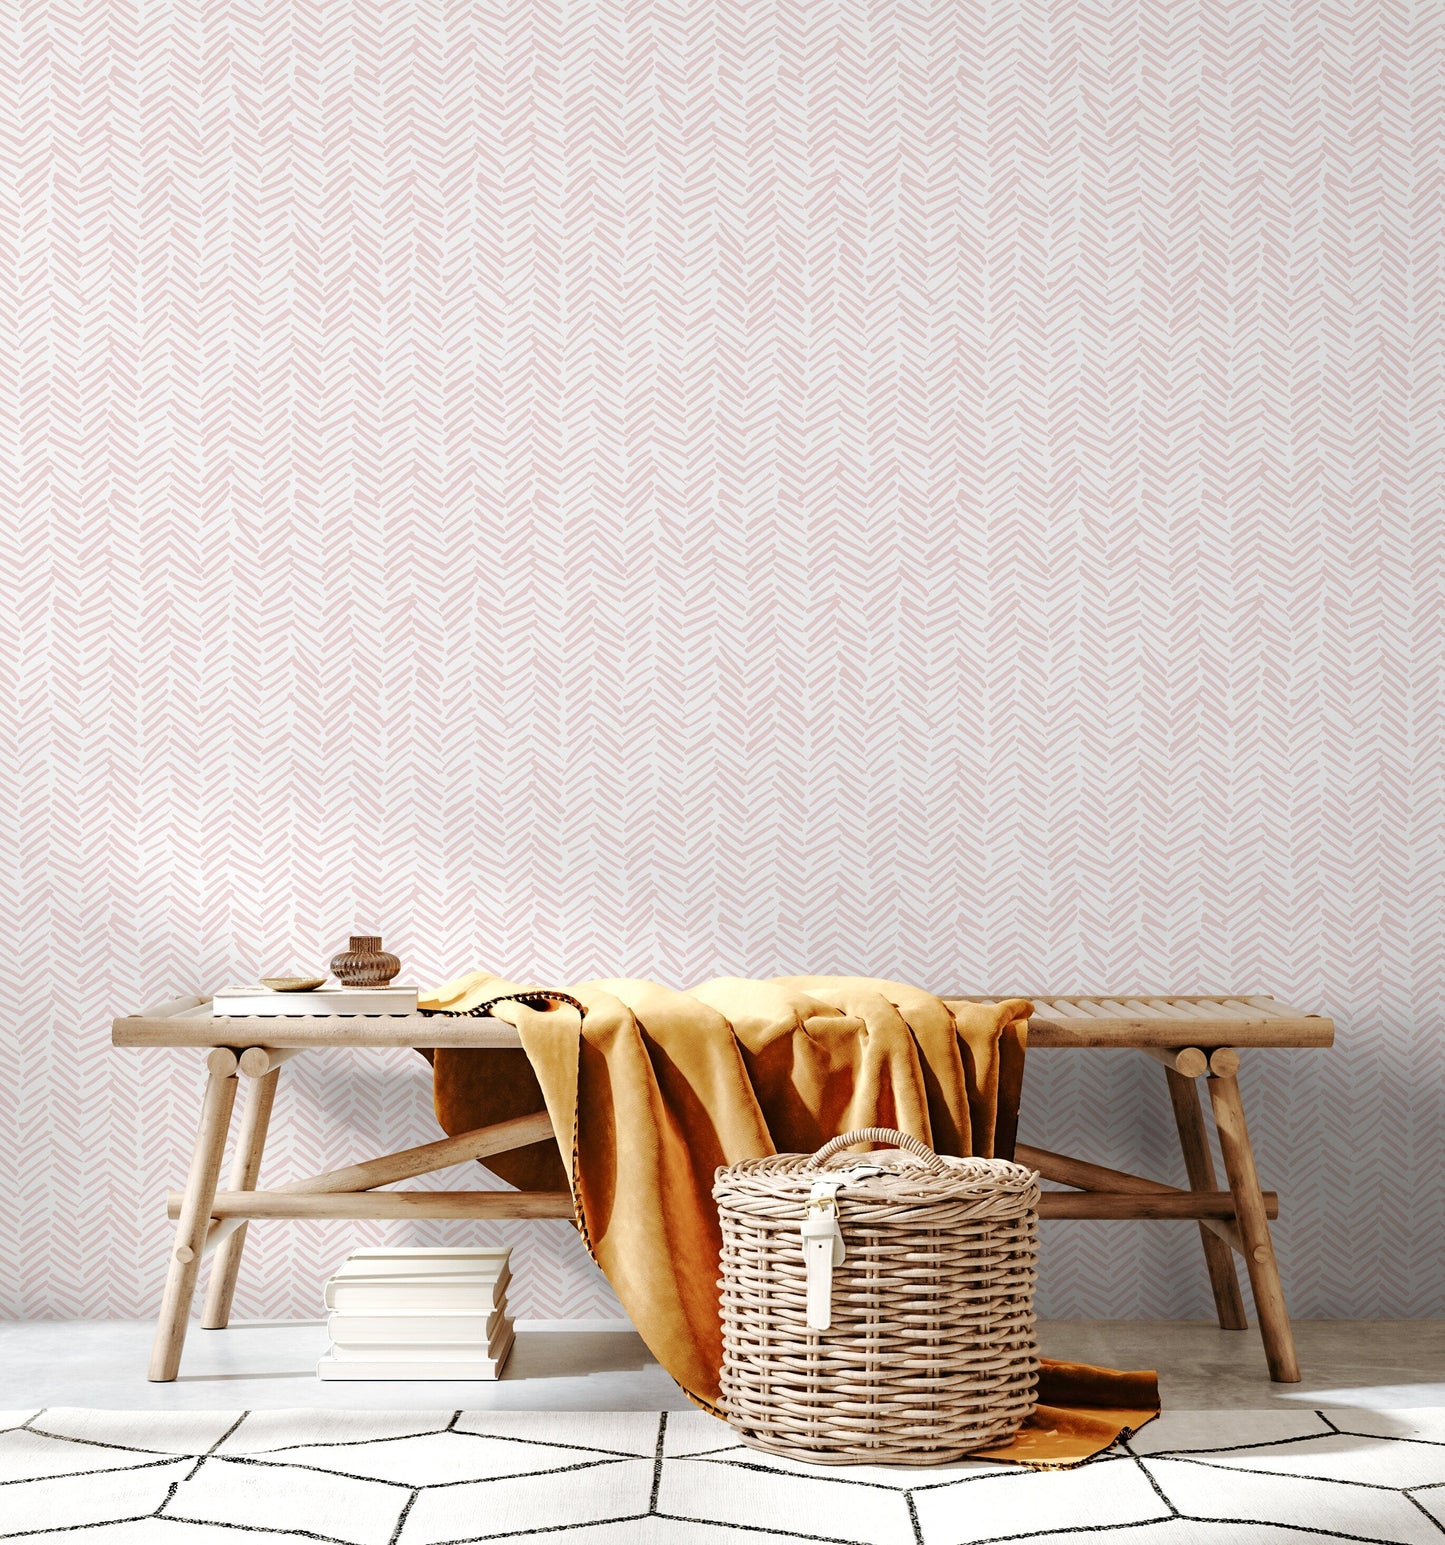 Boho Herringbone in Soft Pink Wallpaper Removable and Repositionable Peel and Stick or Traditional Pre-pasted Wallpaper - ZADY